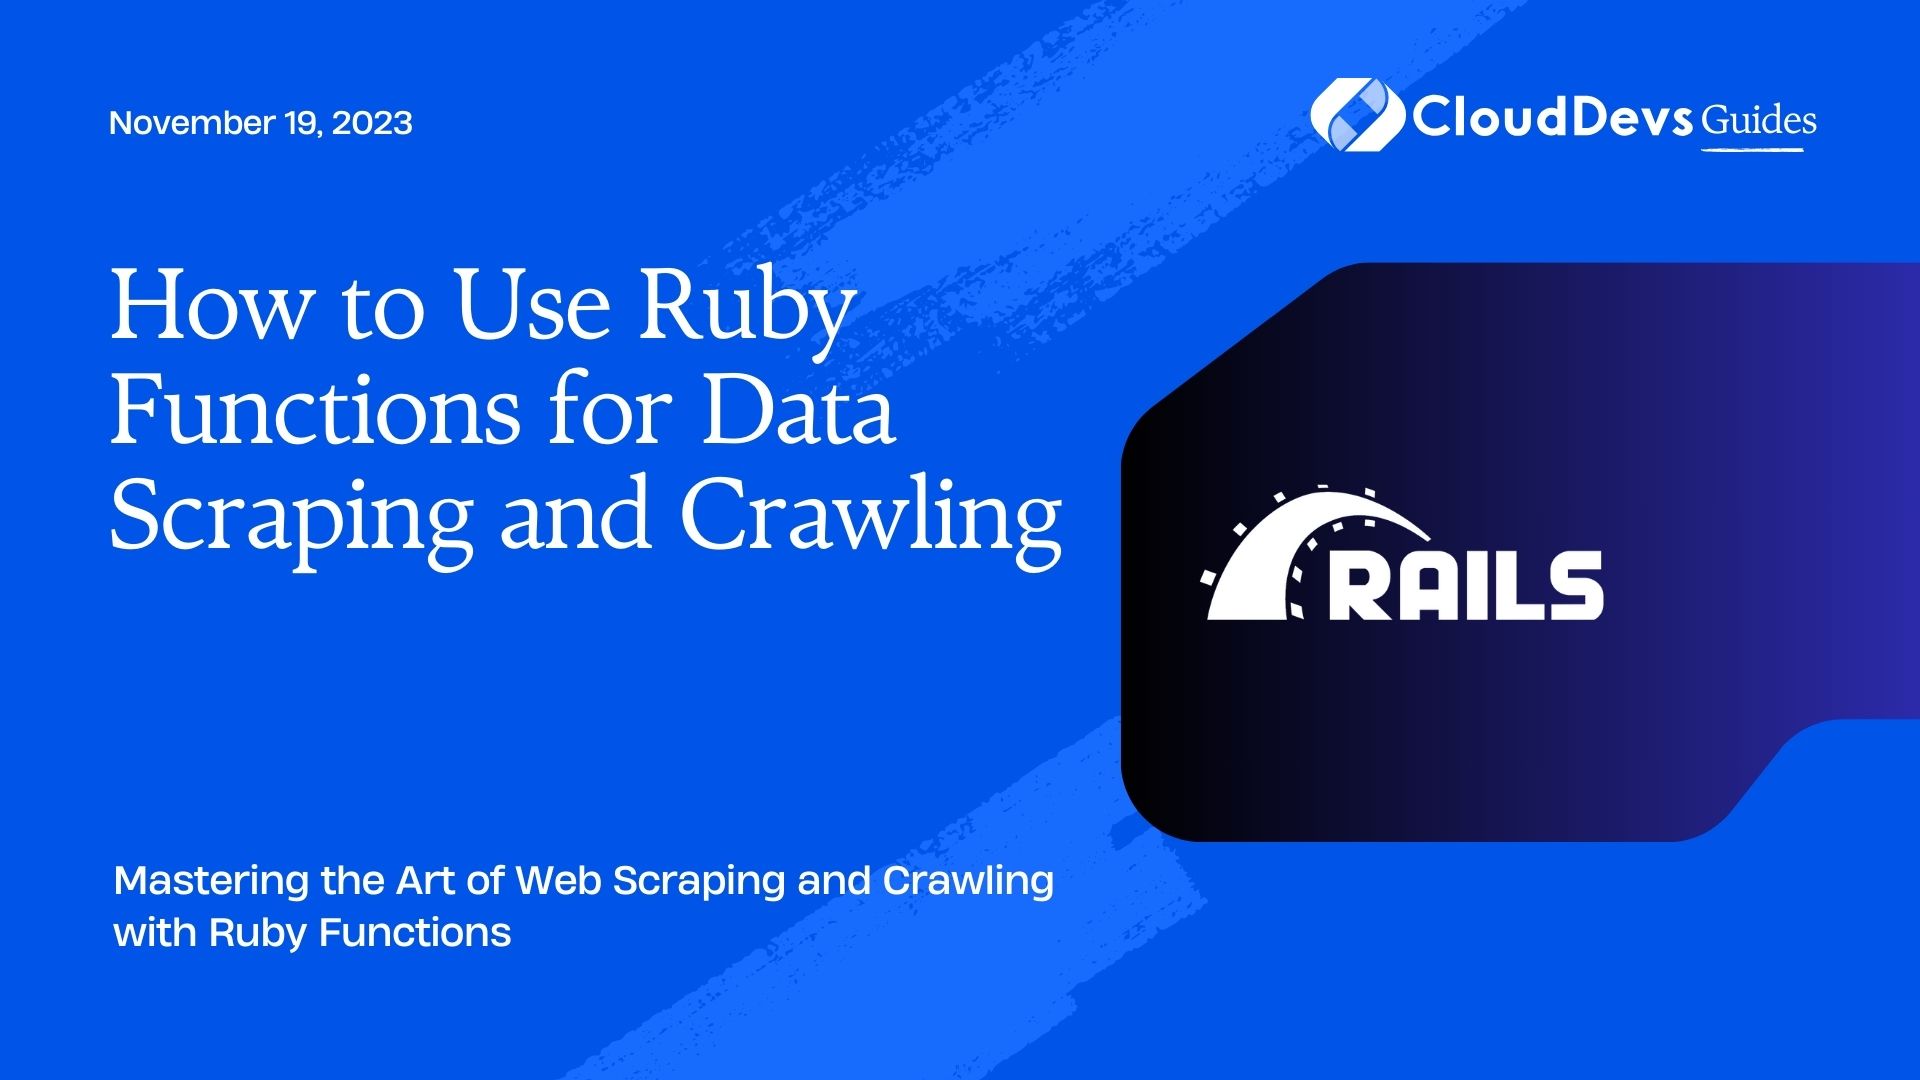 How to Use Ruby Functions for Data Scraping and Crawling